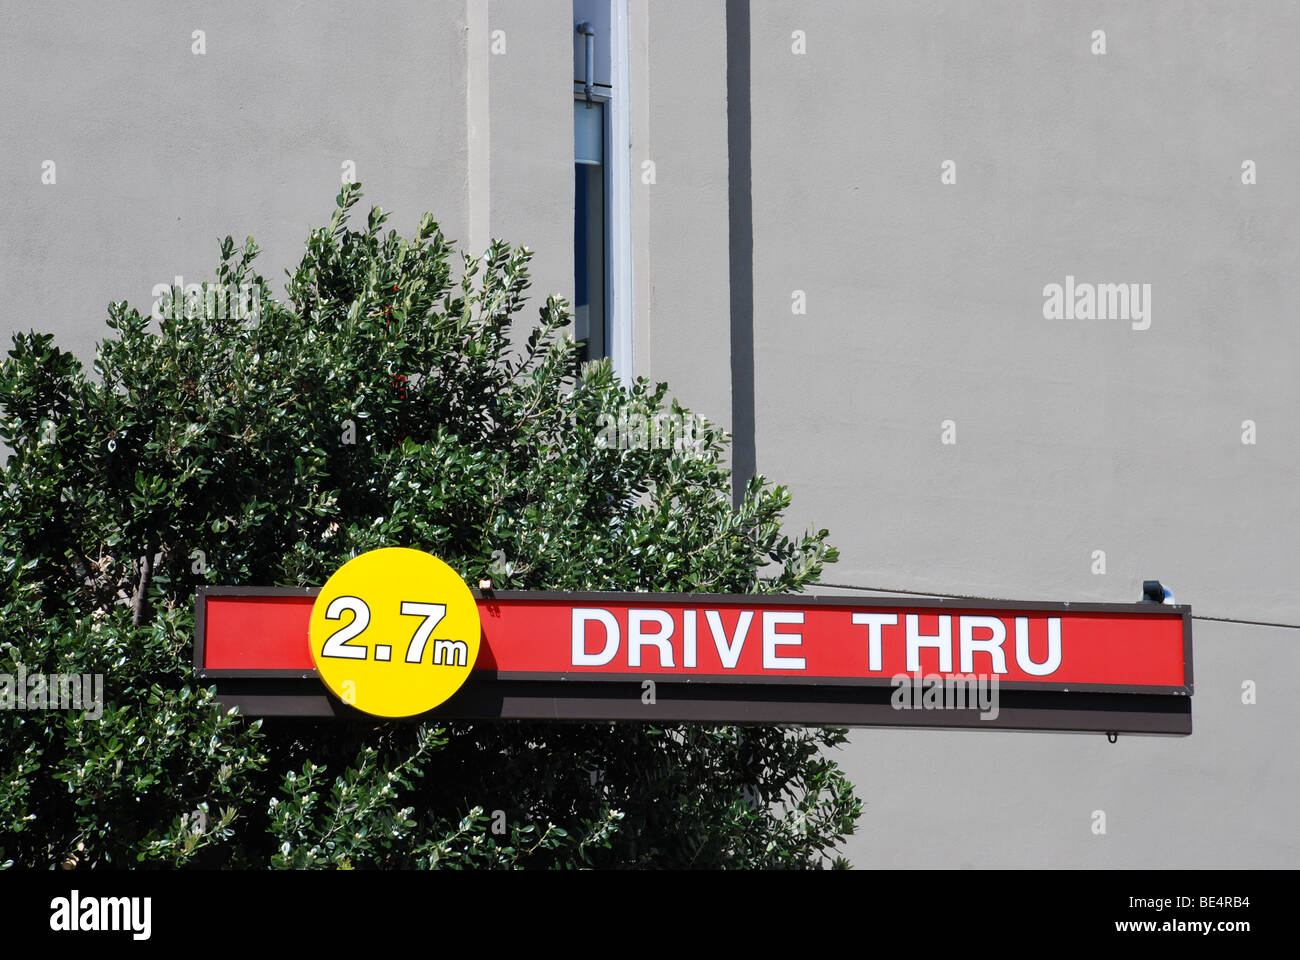 Drive through or 'drive thru' sign, protruding from bush with generic building in background. Stock Photo